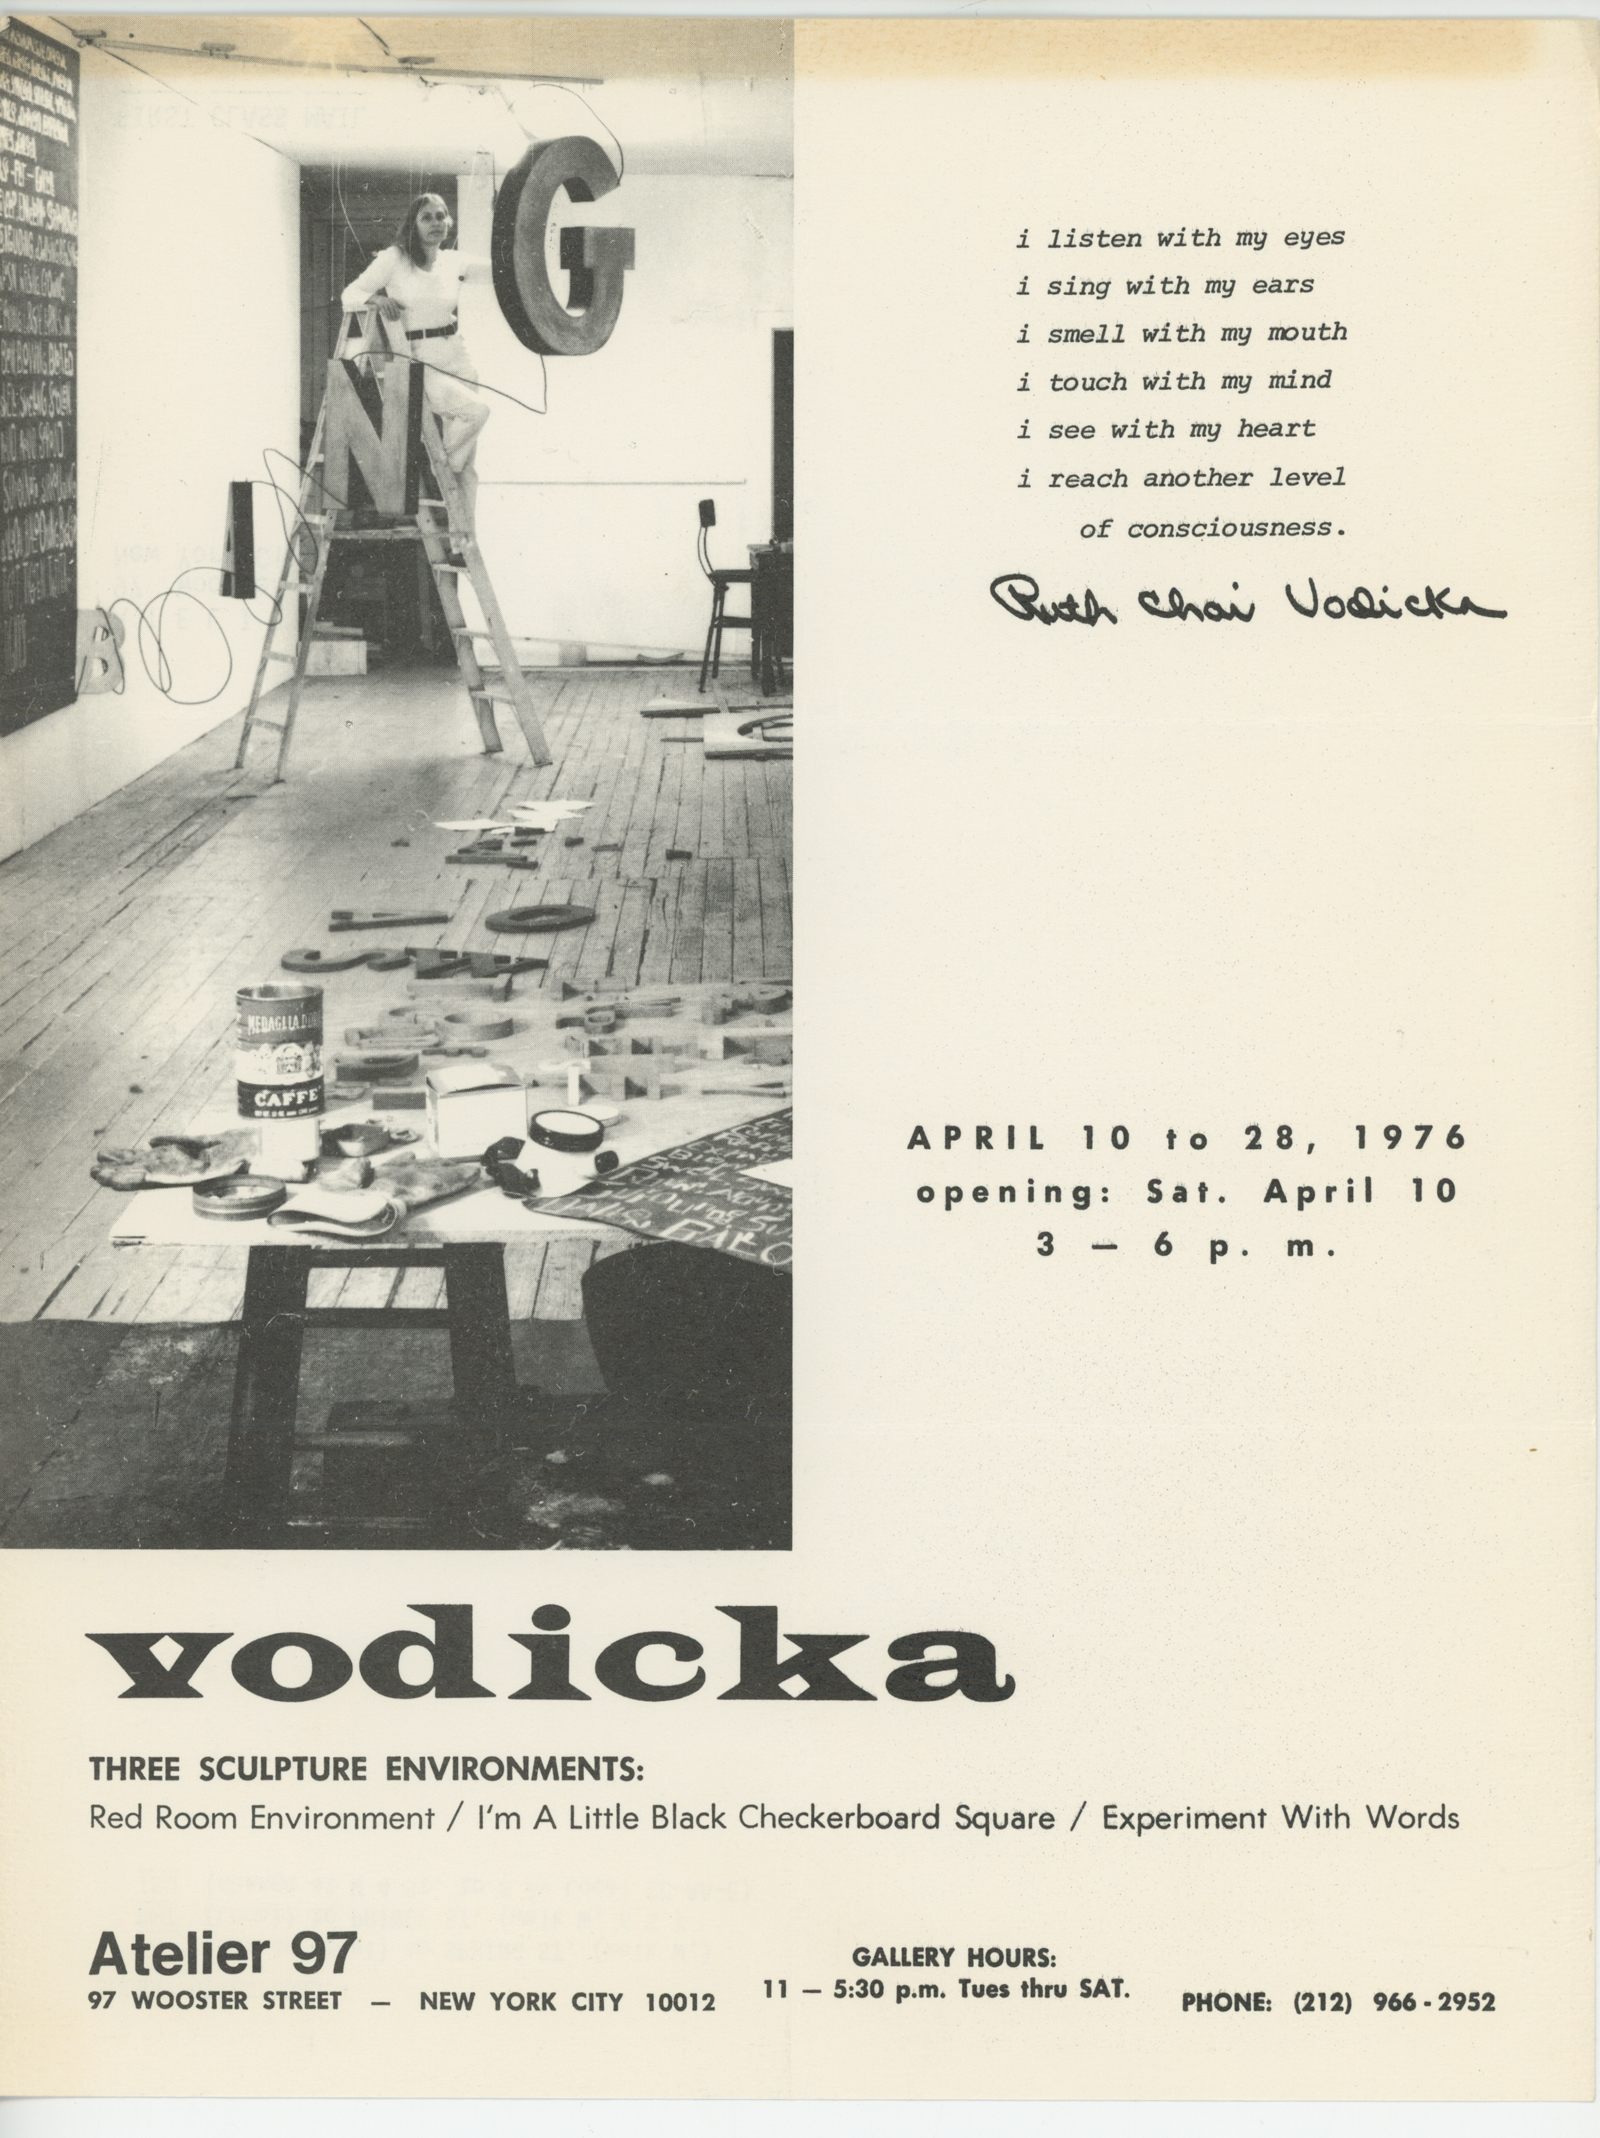 Vodicka at Atelier 97 Exhibition Announcement (1976)